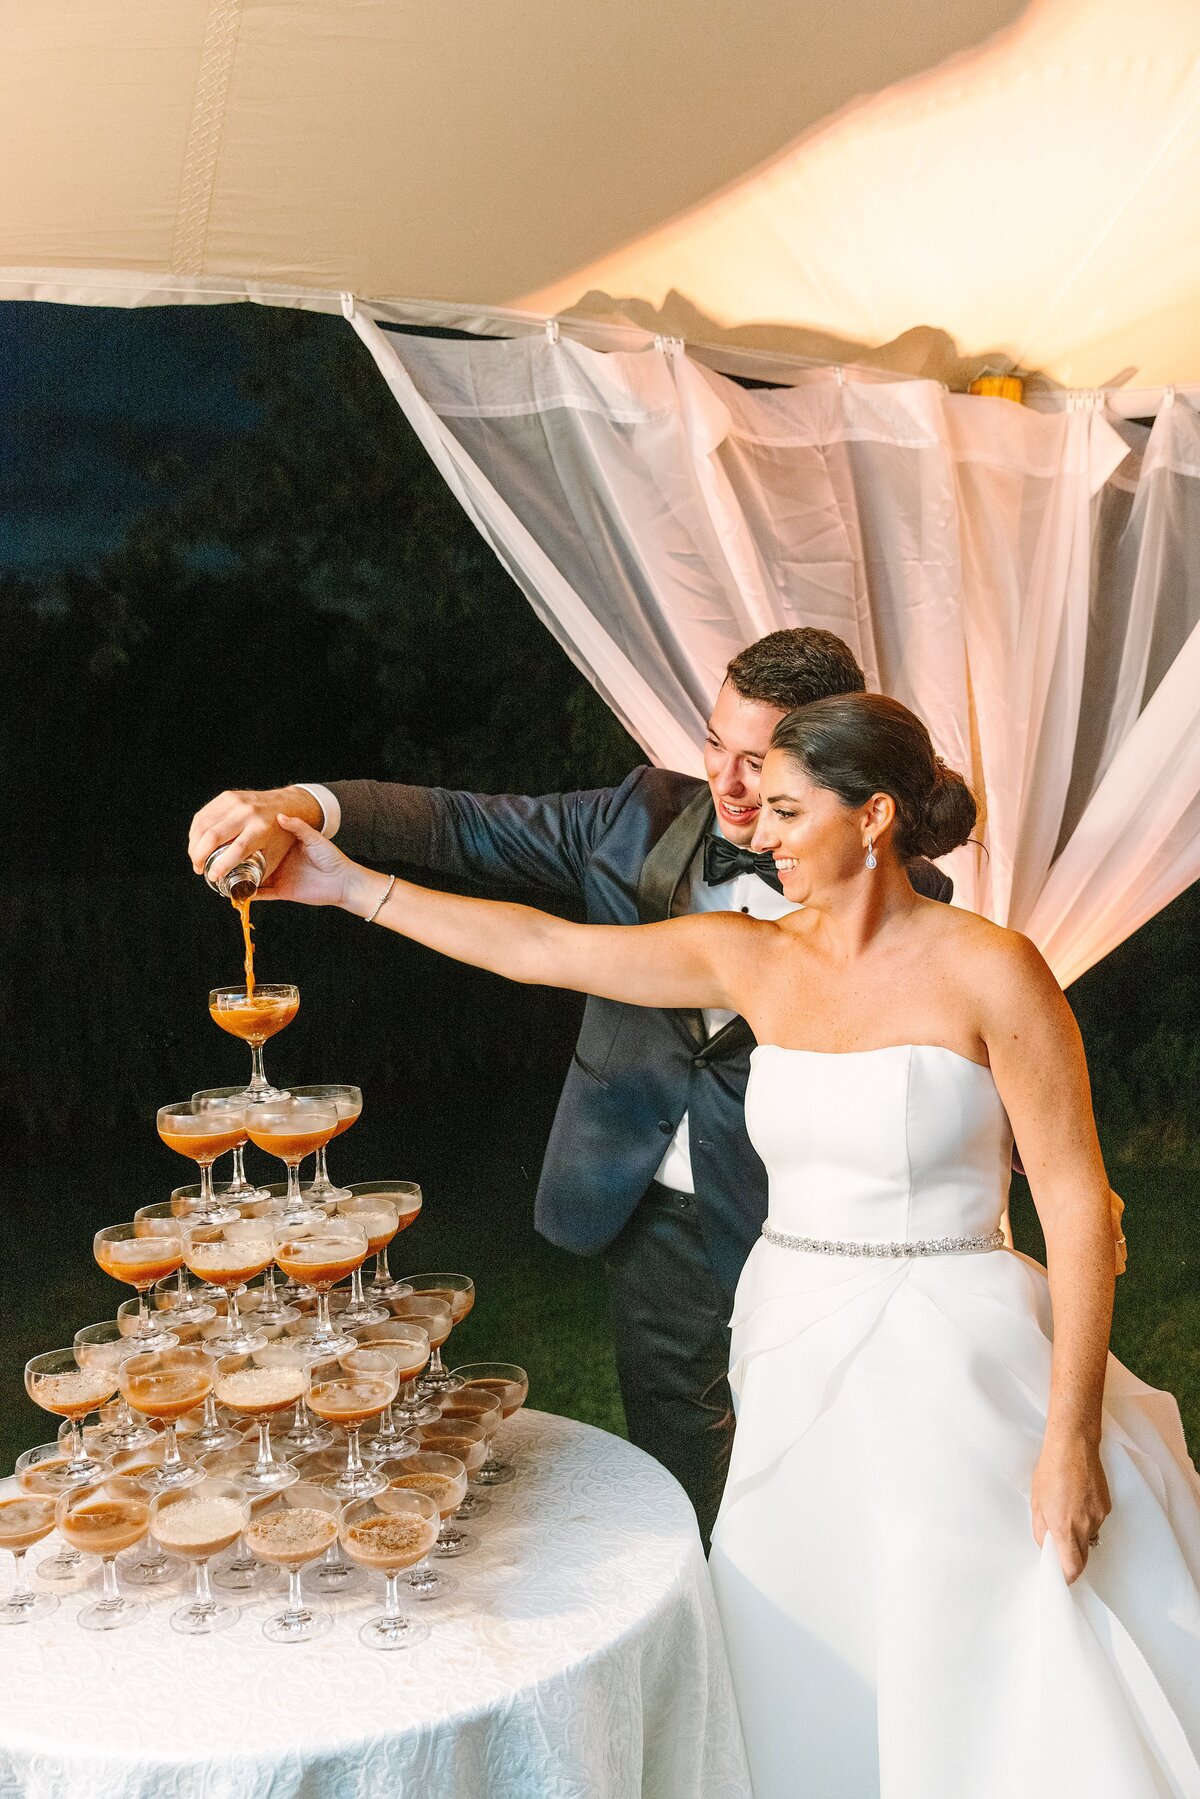 bride and groom pour espresso martini together during the wedding reception in lieu of cutting a cake